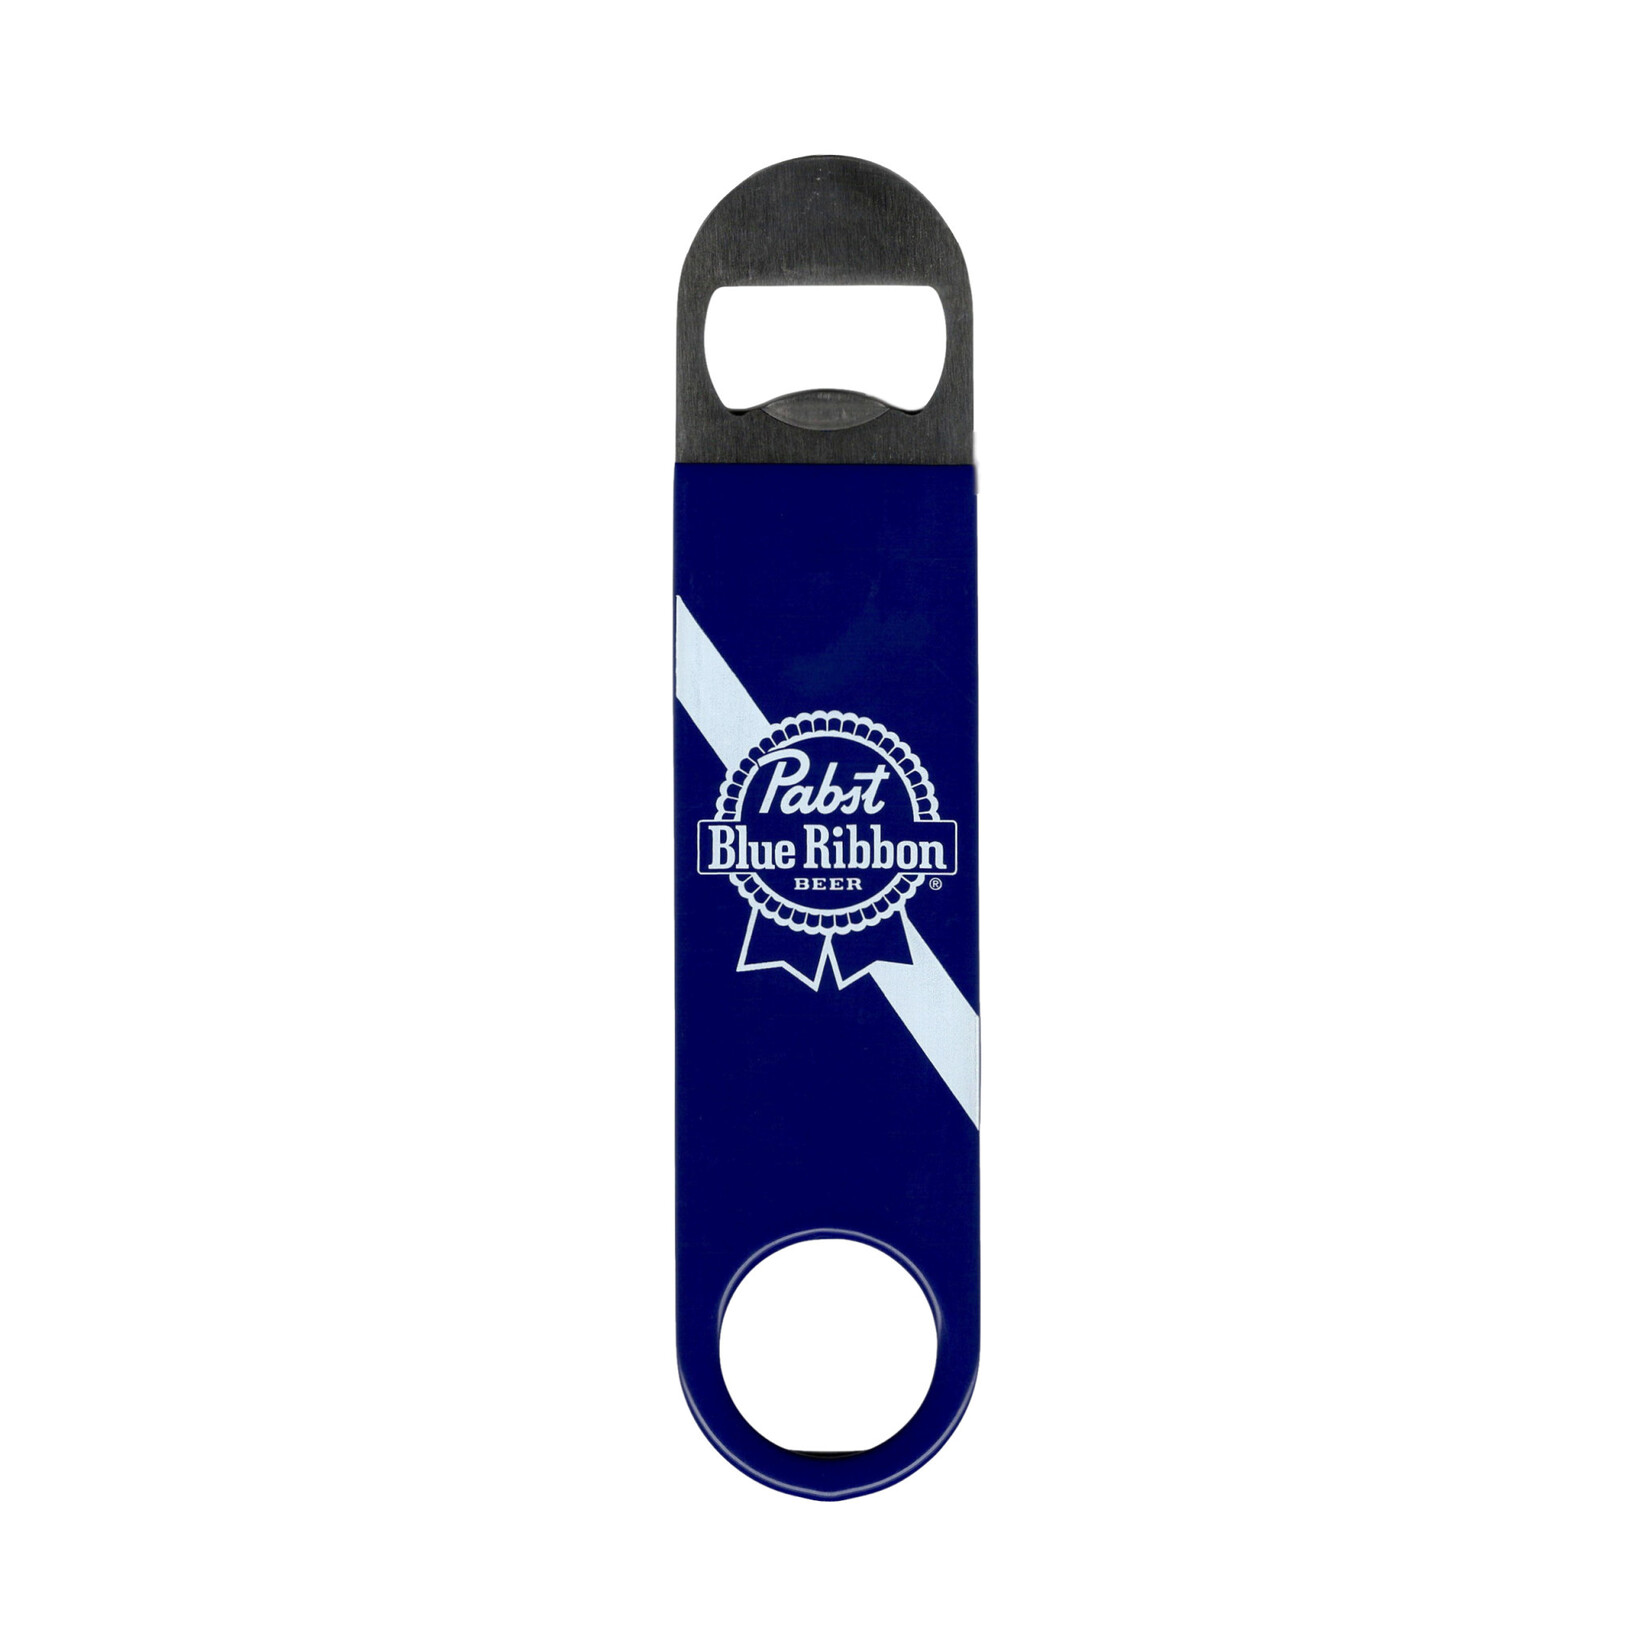 Pabst Pabst White Ribbon Steel Speed Opener